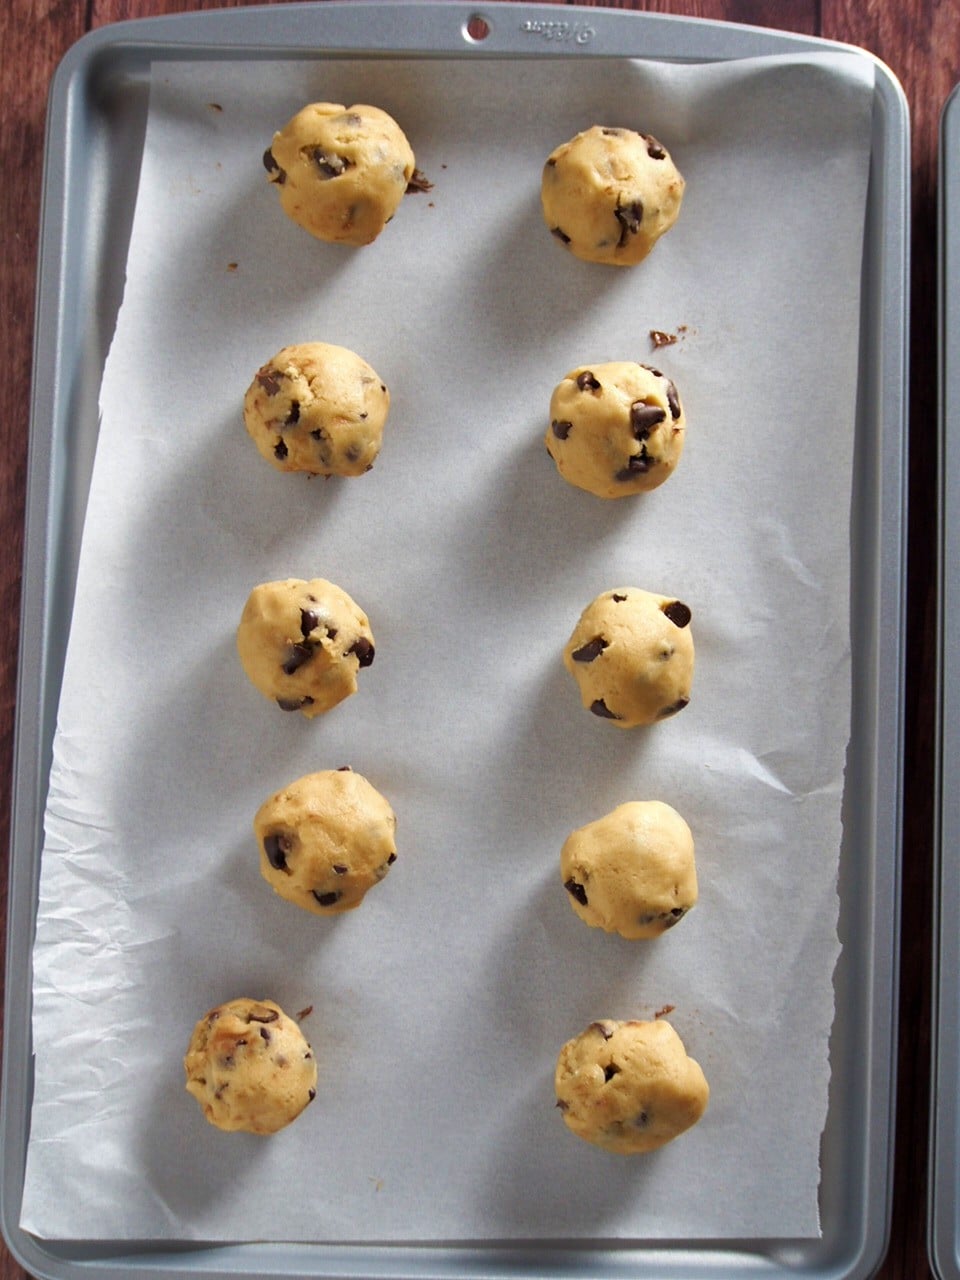 The Nutella filled chocolate chip cookie dough ready for baking.